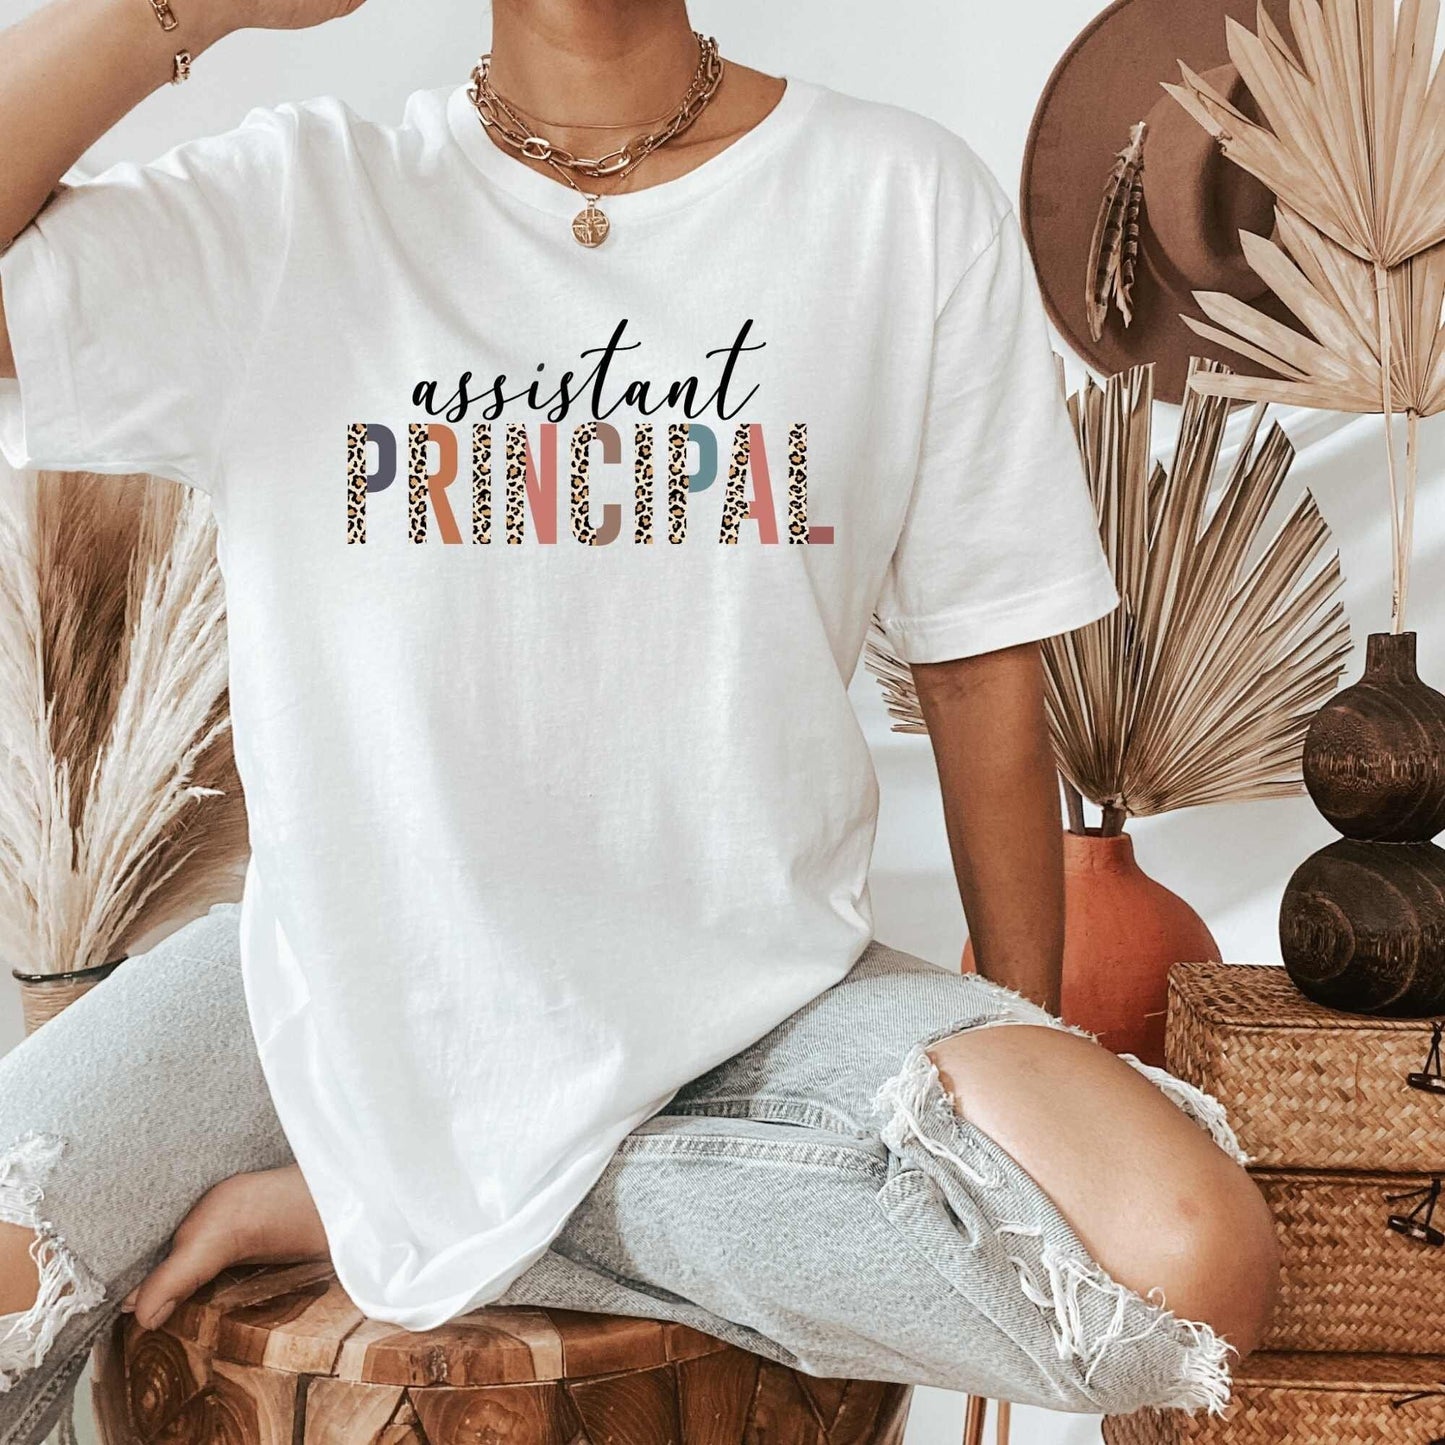 Assistant Principal Shirt | New Administration, Elementary, Middle, High School Teams, Appreciation Gifts, 100th Day of School Celebration HMDesignStudioUS